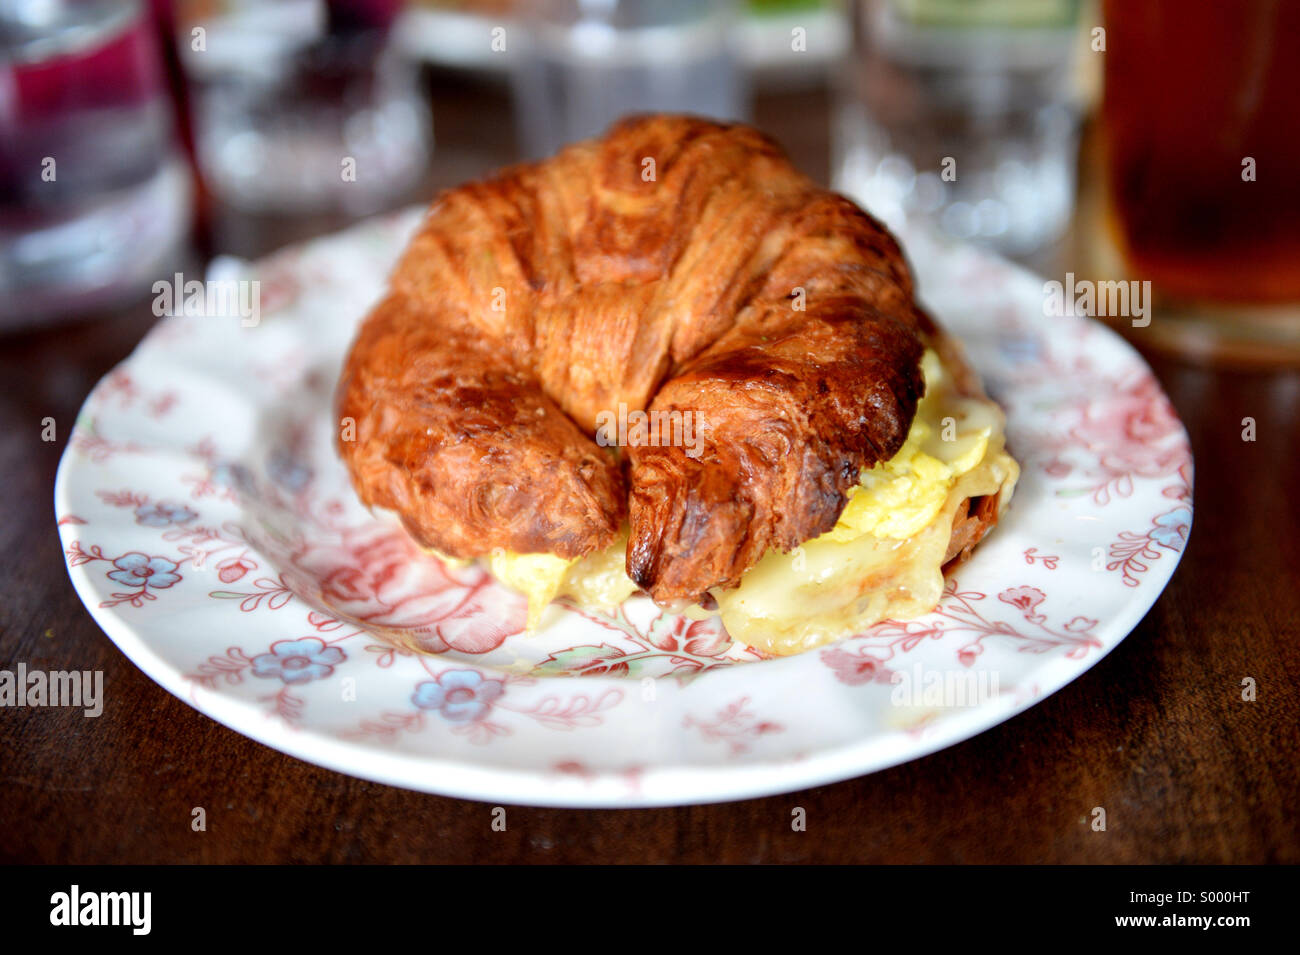 A fried egg and cheese of a croissant sandwich. Stock Photo